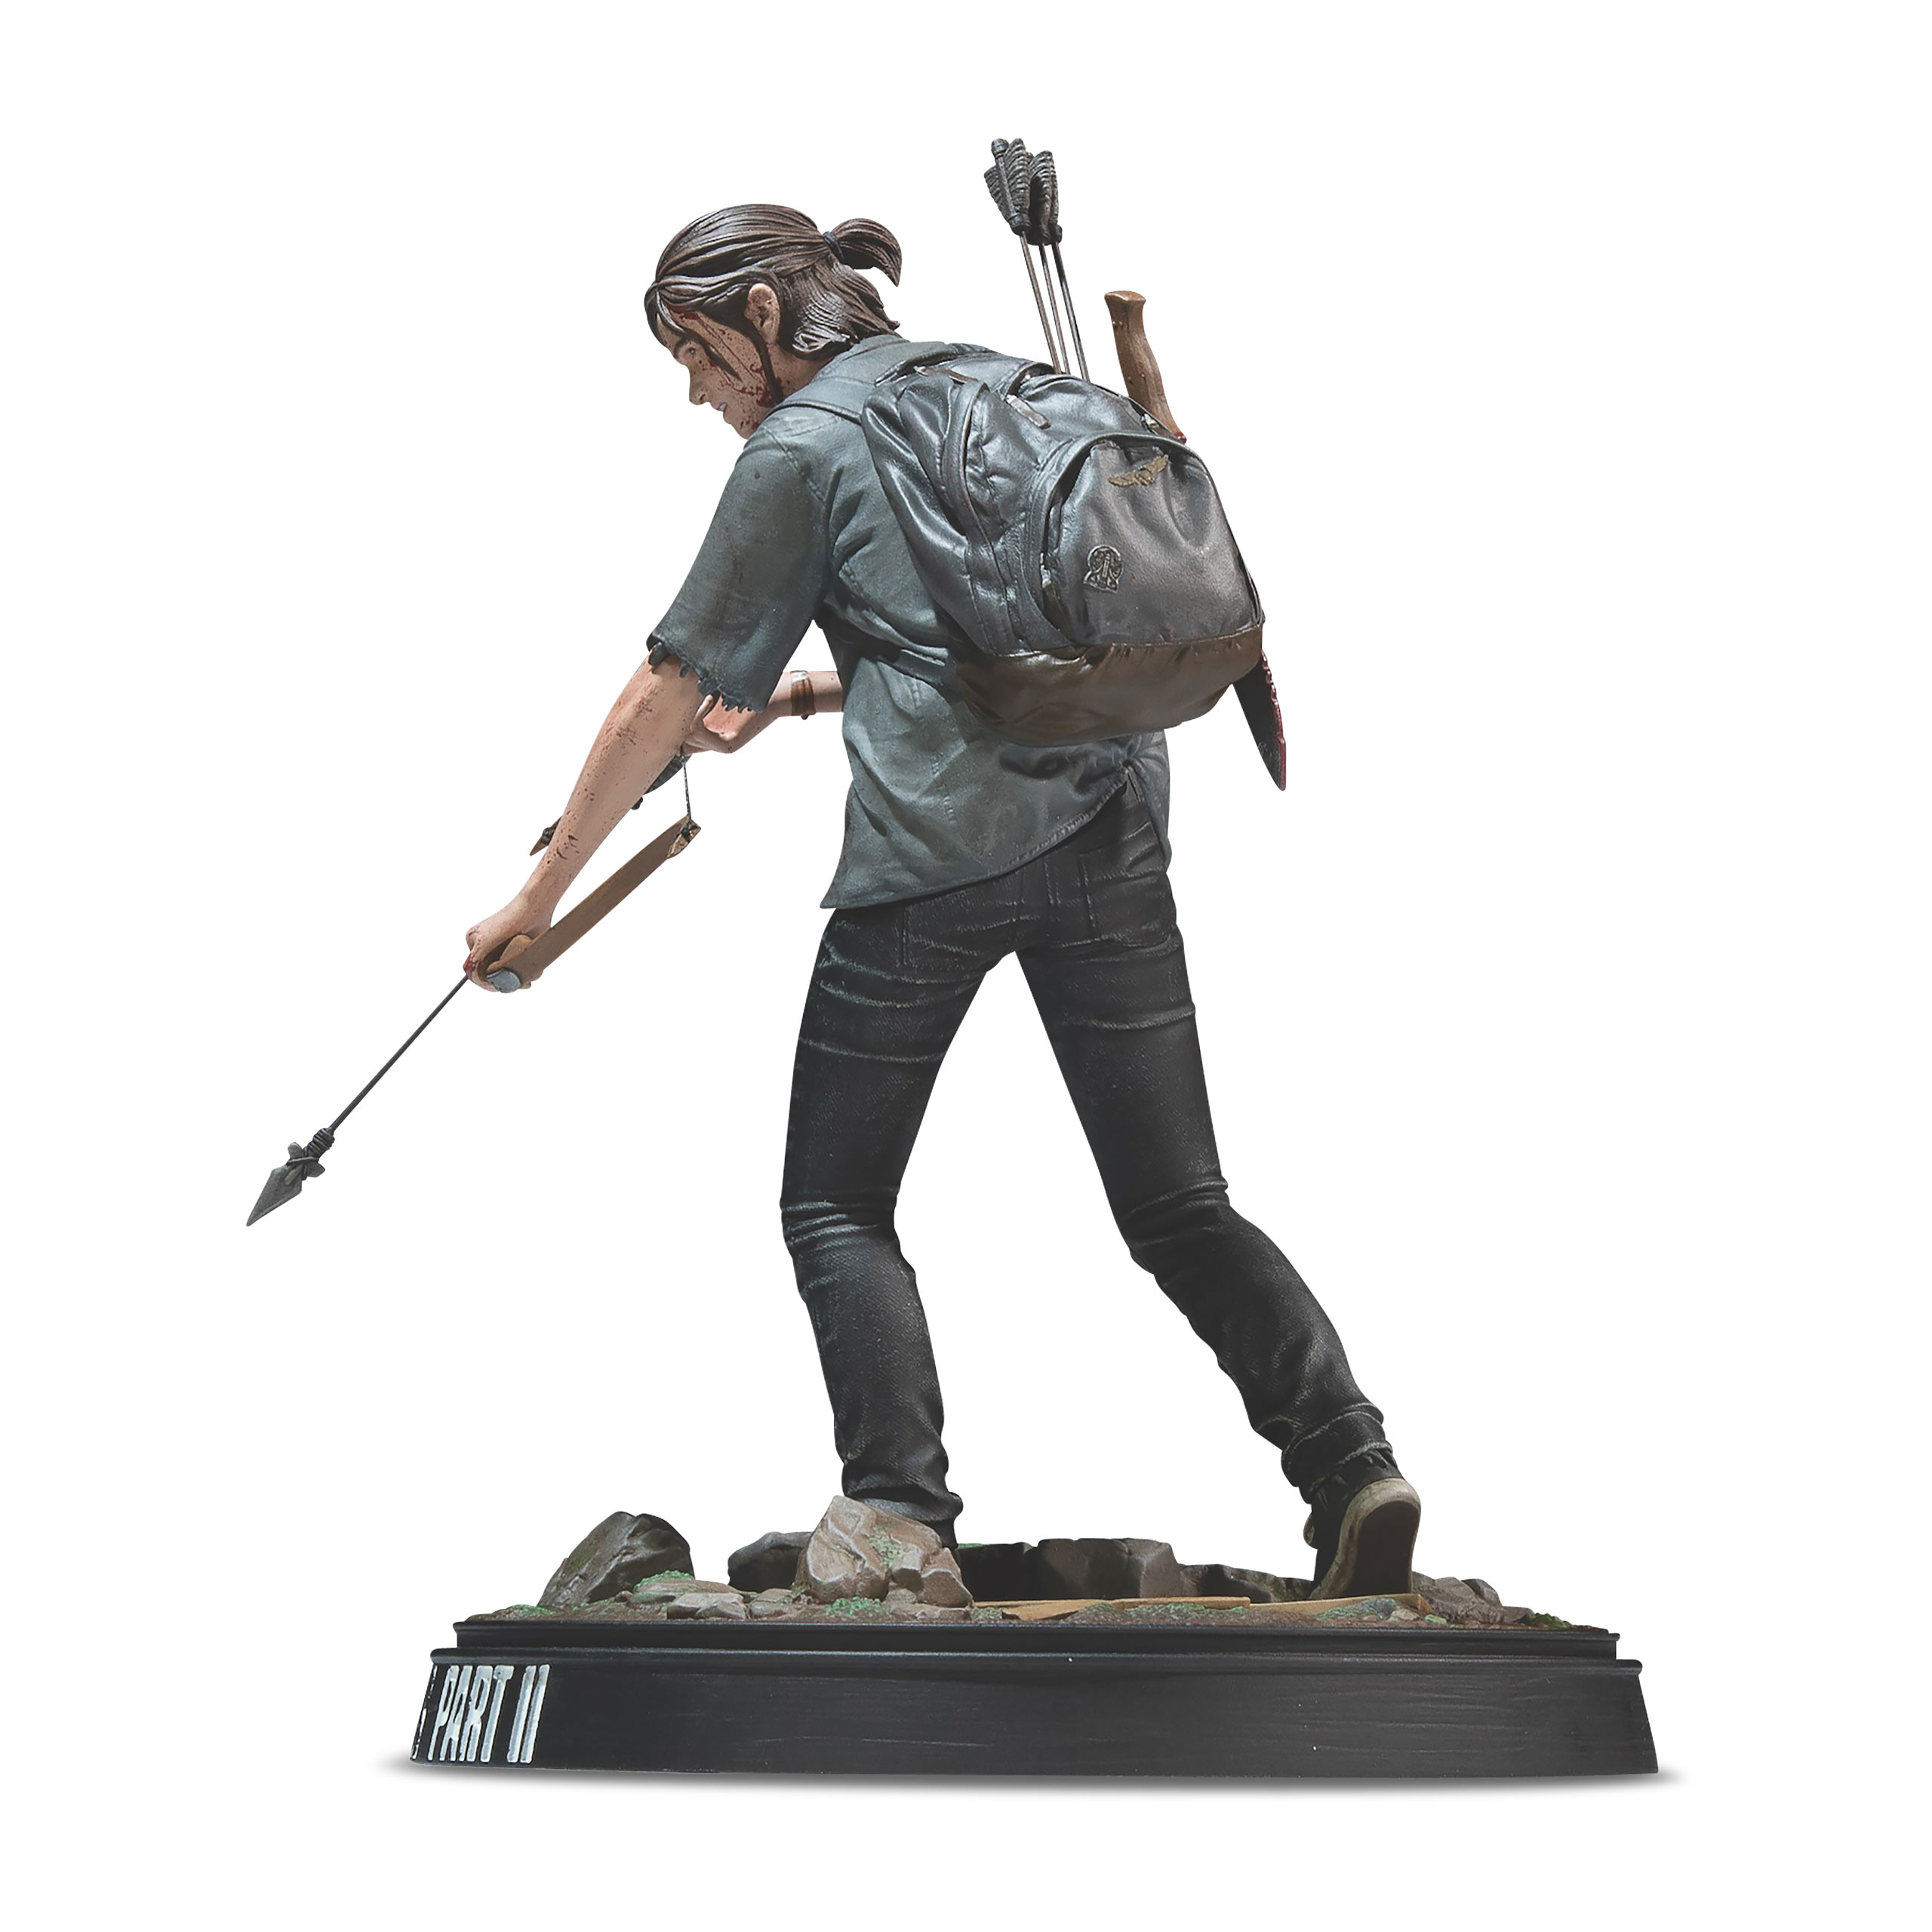 The Last of Us - Ellie with Bow Statue 21 cm